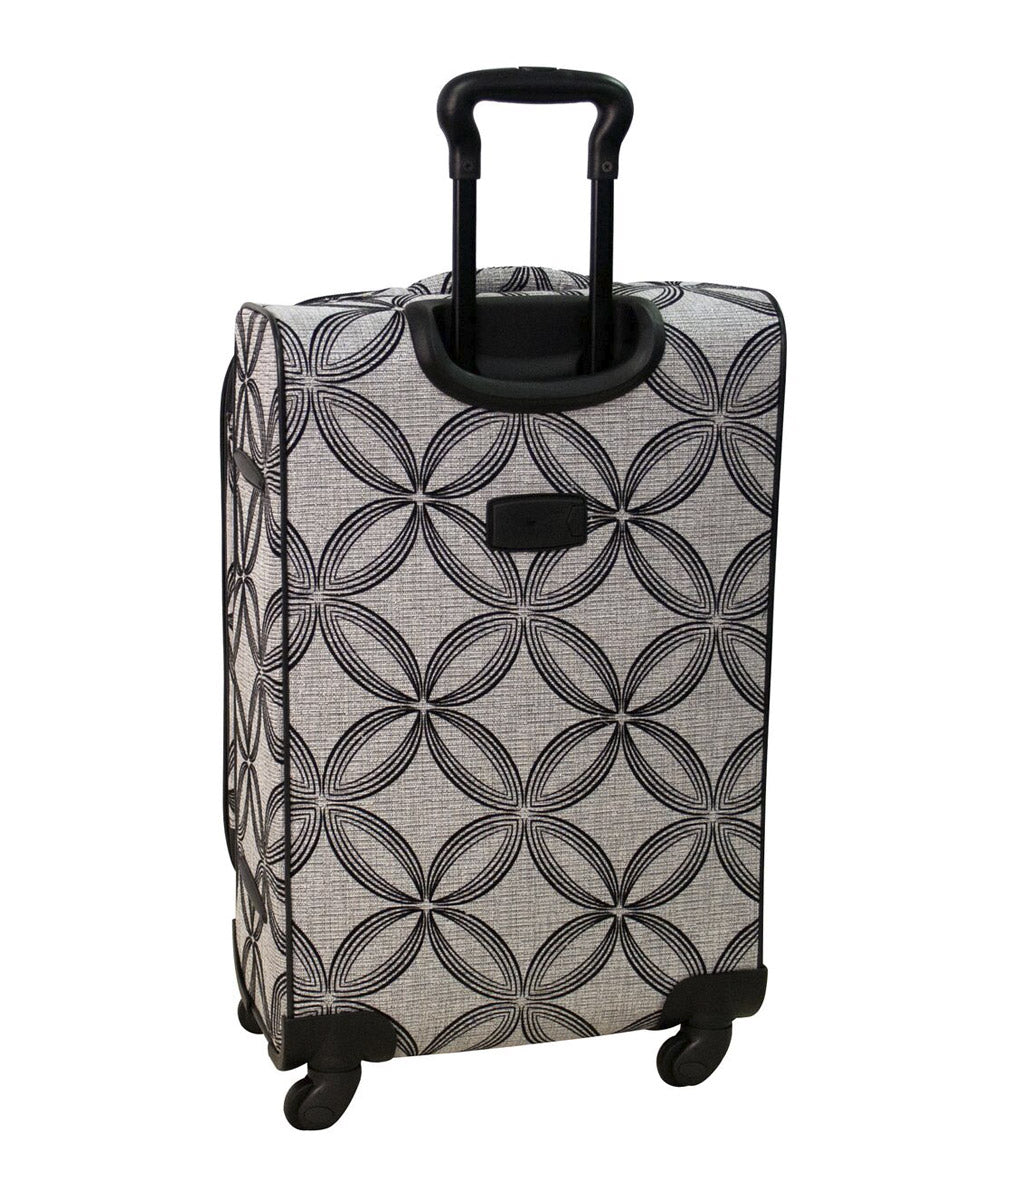 American Flyer 5-Piece Spinner Luggage Set